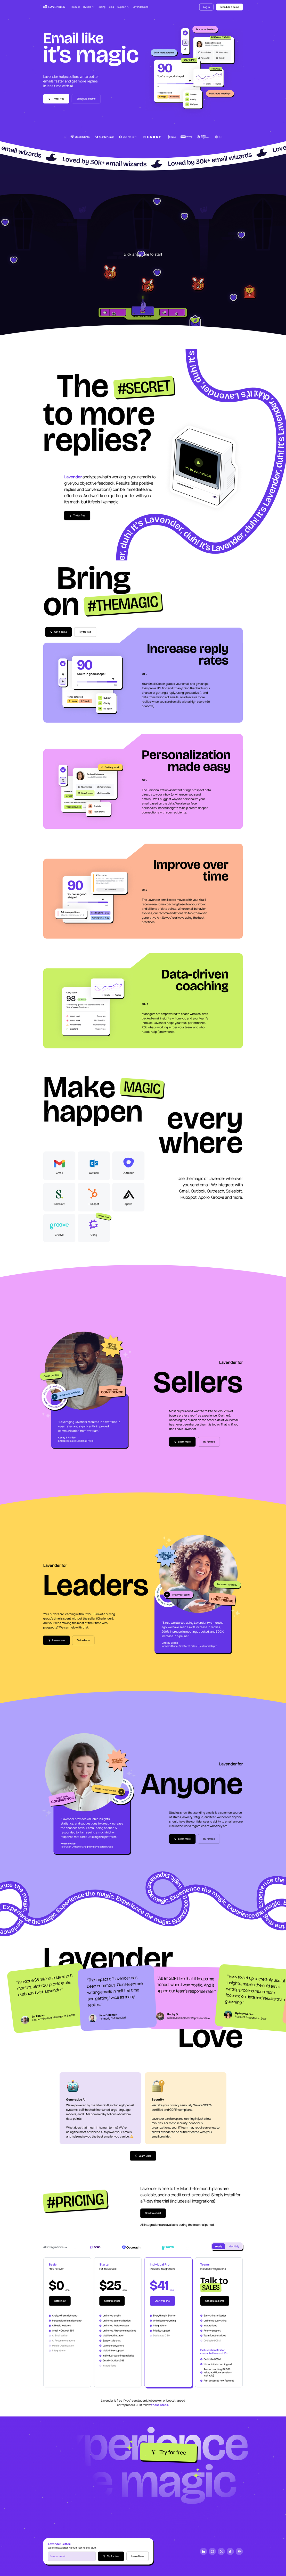 Lavender Landing Page Example: Lavender helps thousands of sellers around the world write better emails faster and get more positive replies in less time.